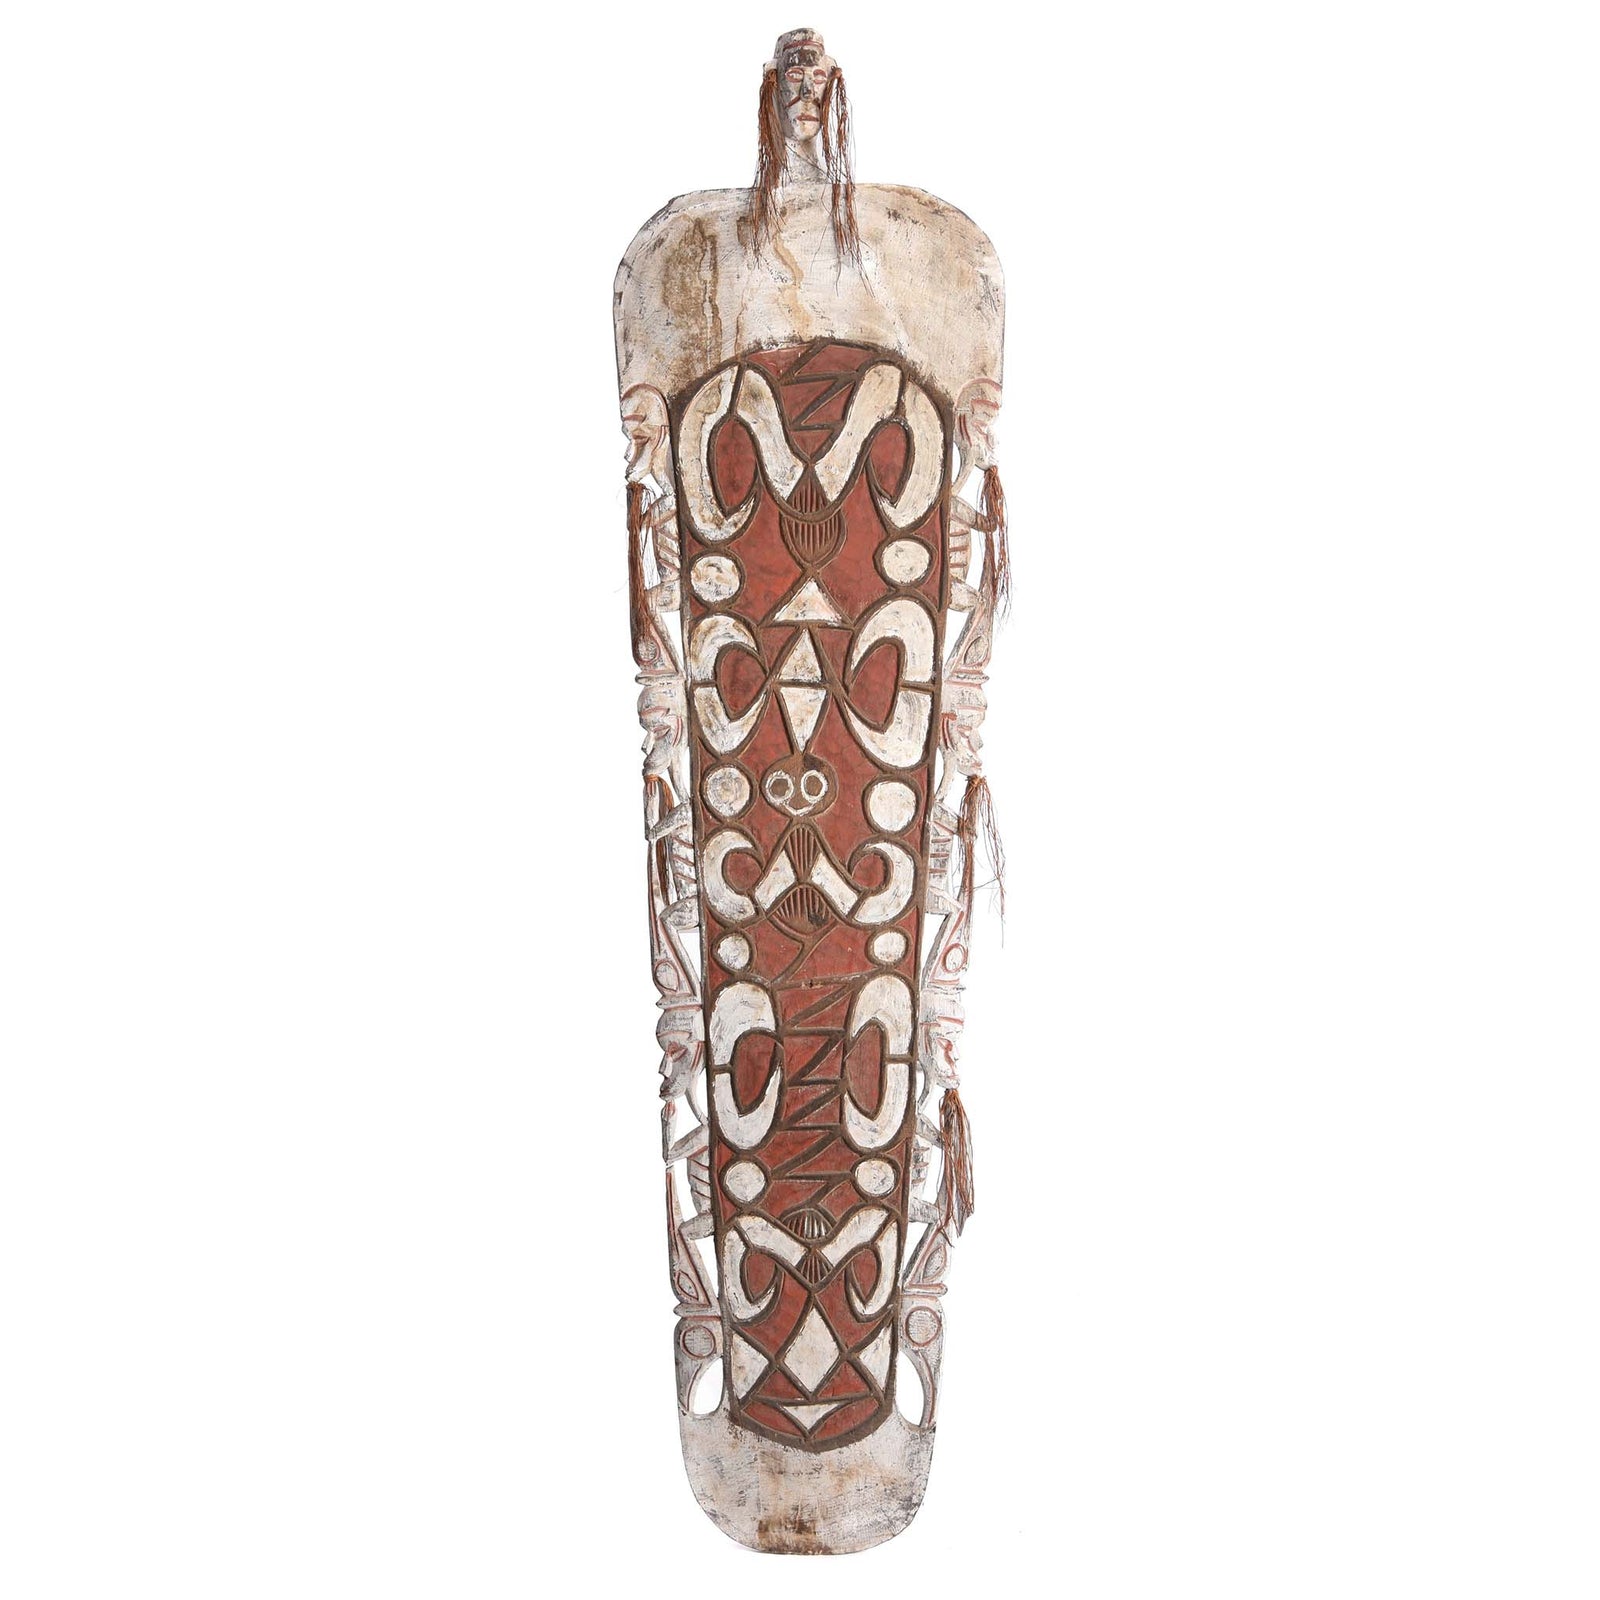 An Asmat Shield With Figures And Scrolls from New Guinea - Ca 85 yrs old | Indigo Antiques